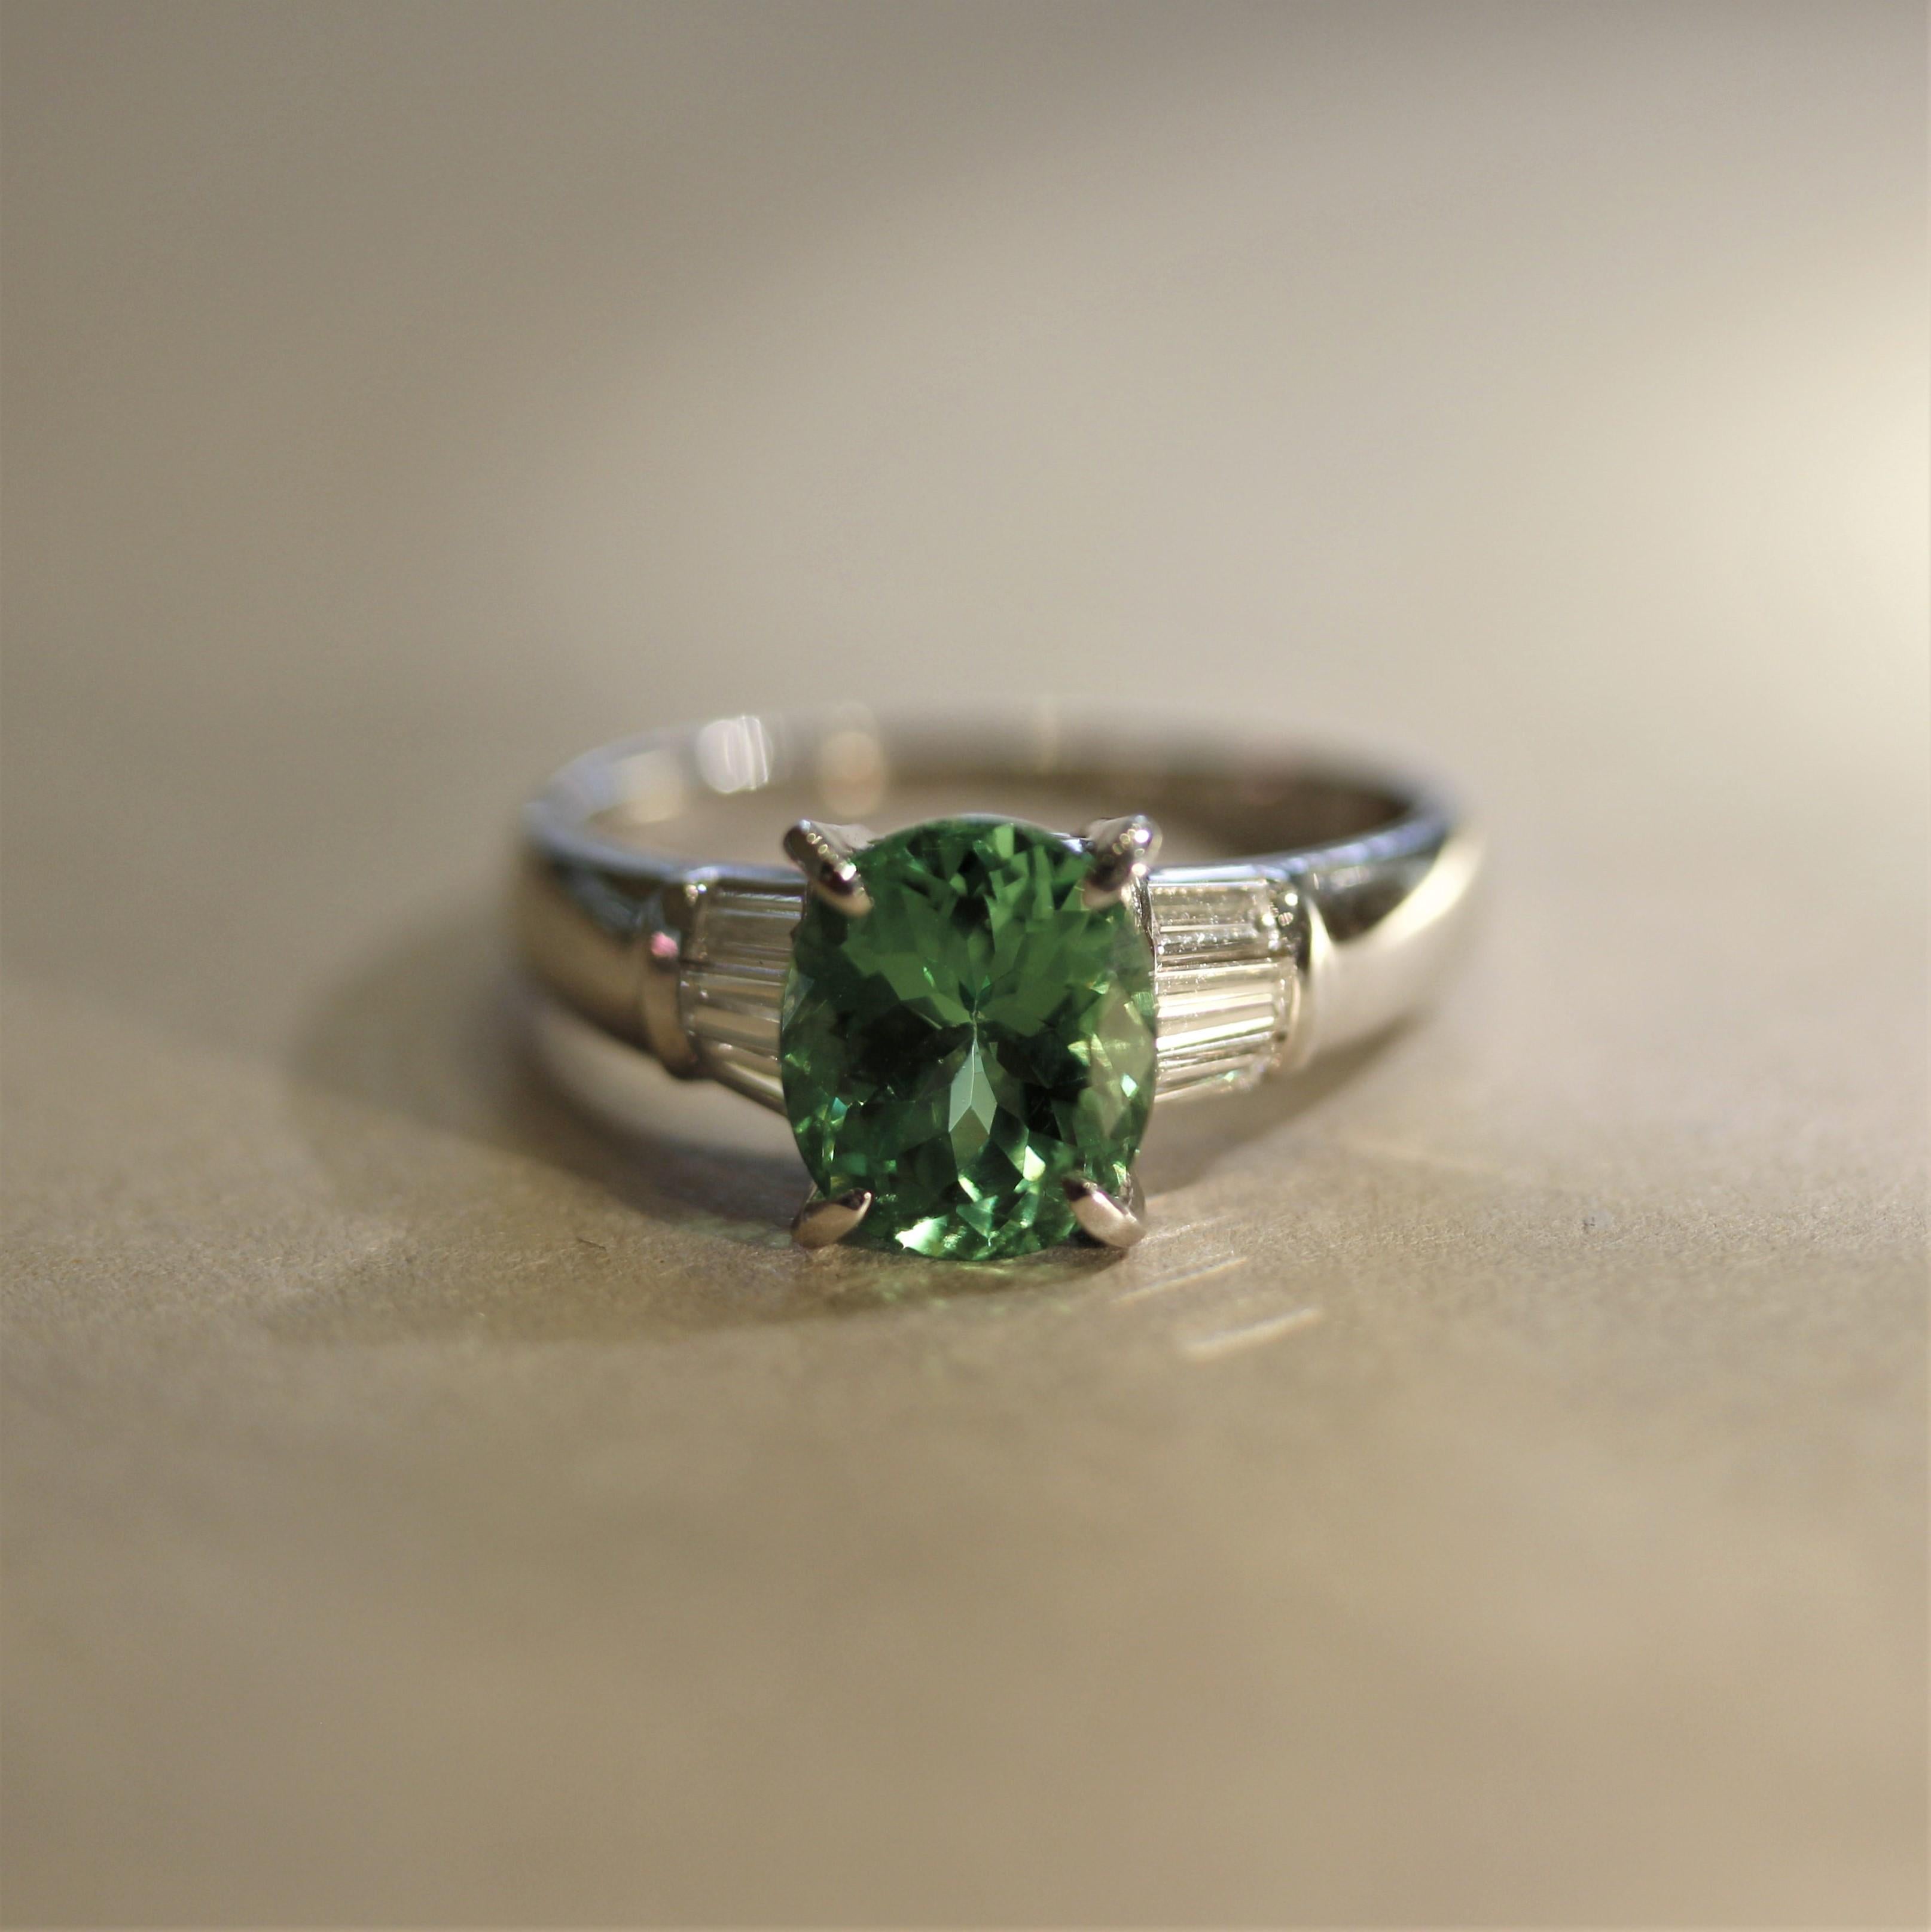 Tsavorite is a rare and beautiful green garnet only found in Tanzania and Kenya. This vibrant and brilliant tsavorite is shaped as an oval and weighs 2.51 carats (stones over 3 carats are extremely scarce). It is accented by 0.34 carats of